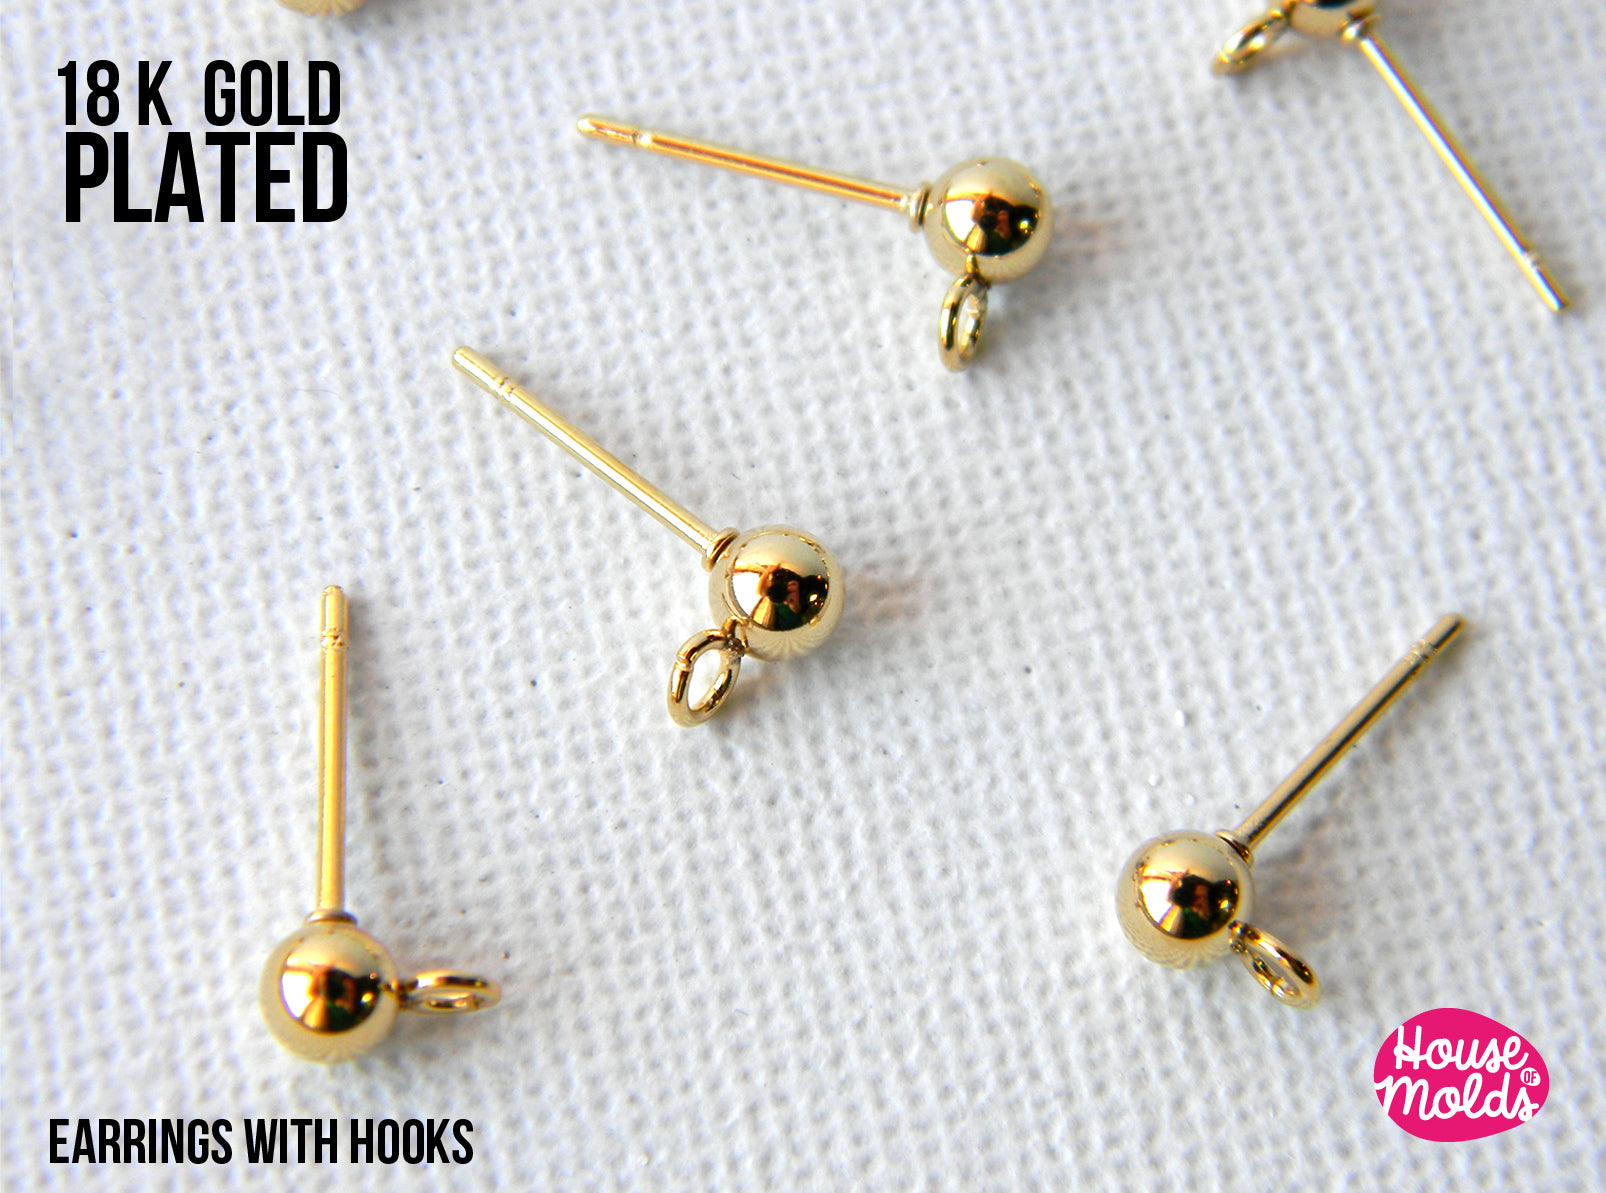 18K Gold Plated Ball Earrings with Hooks - backs included - luxury qua –  House Of Molds